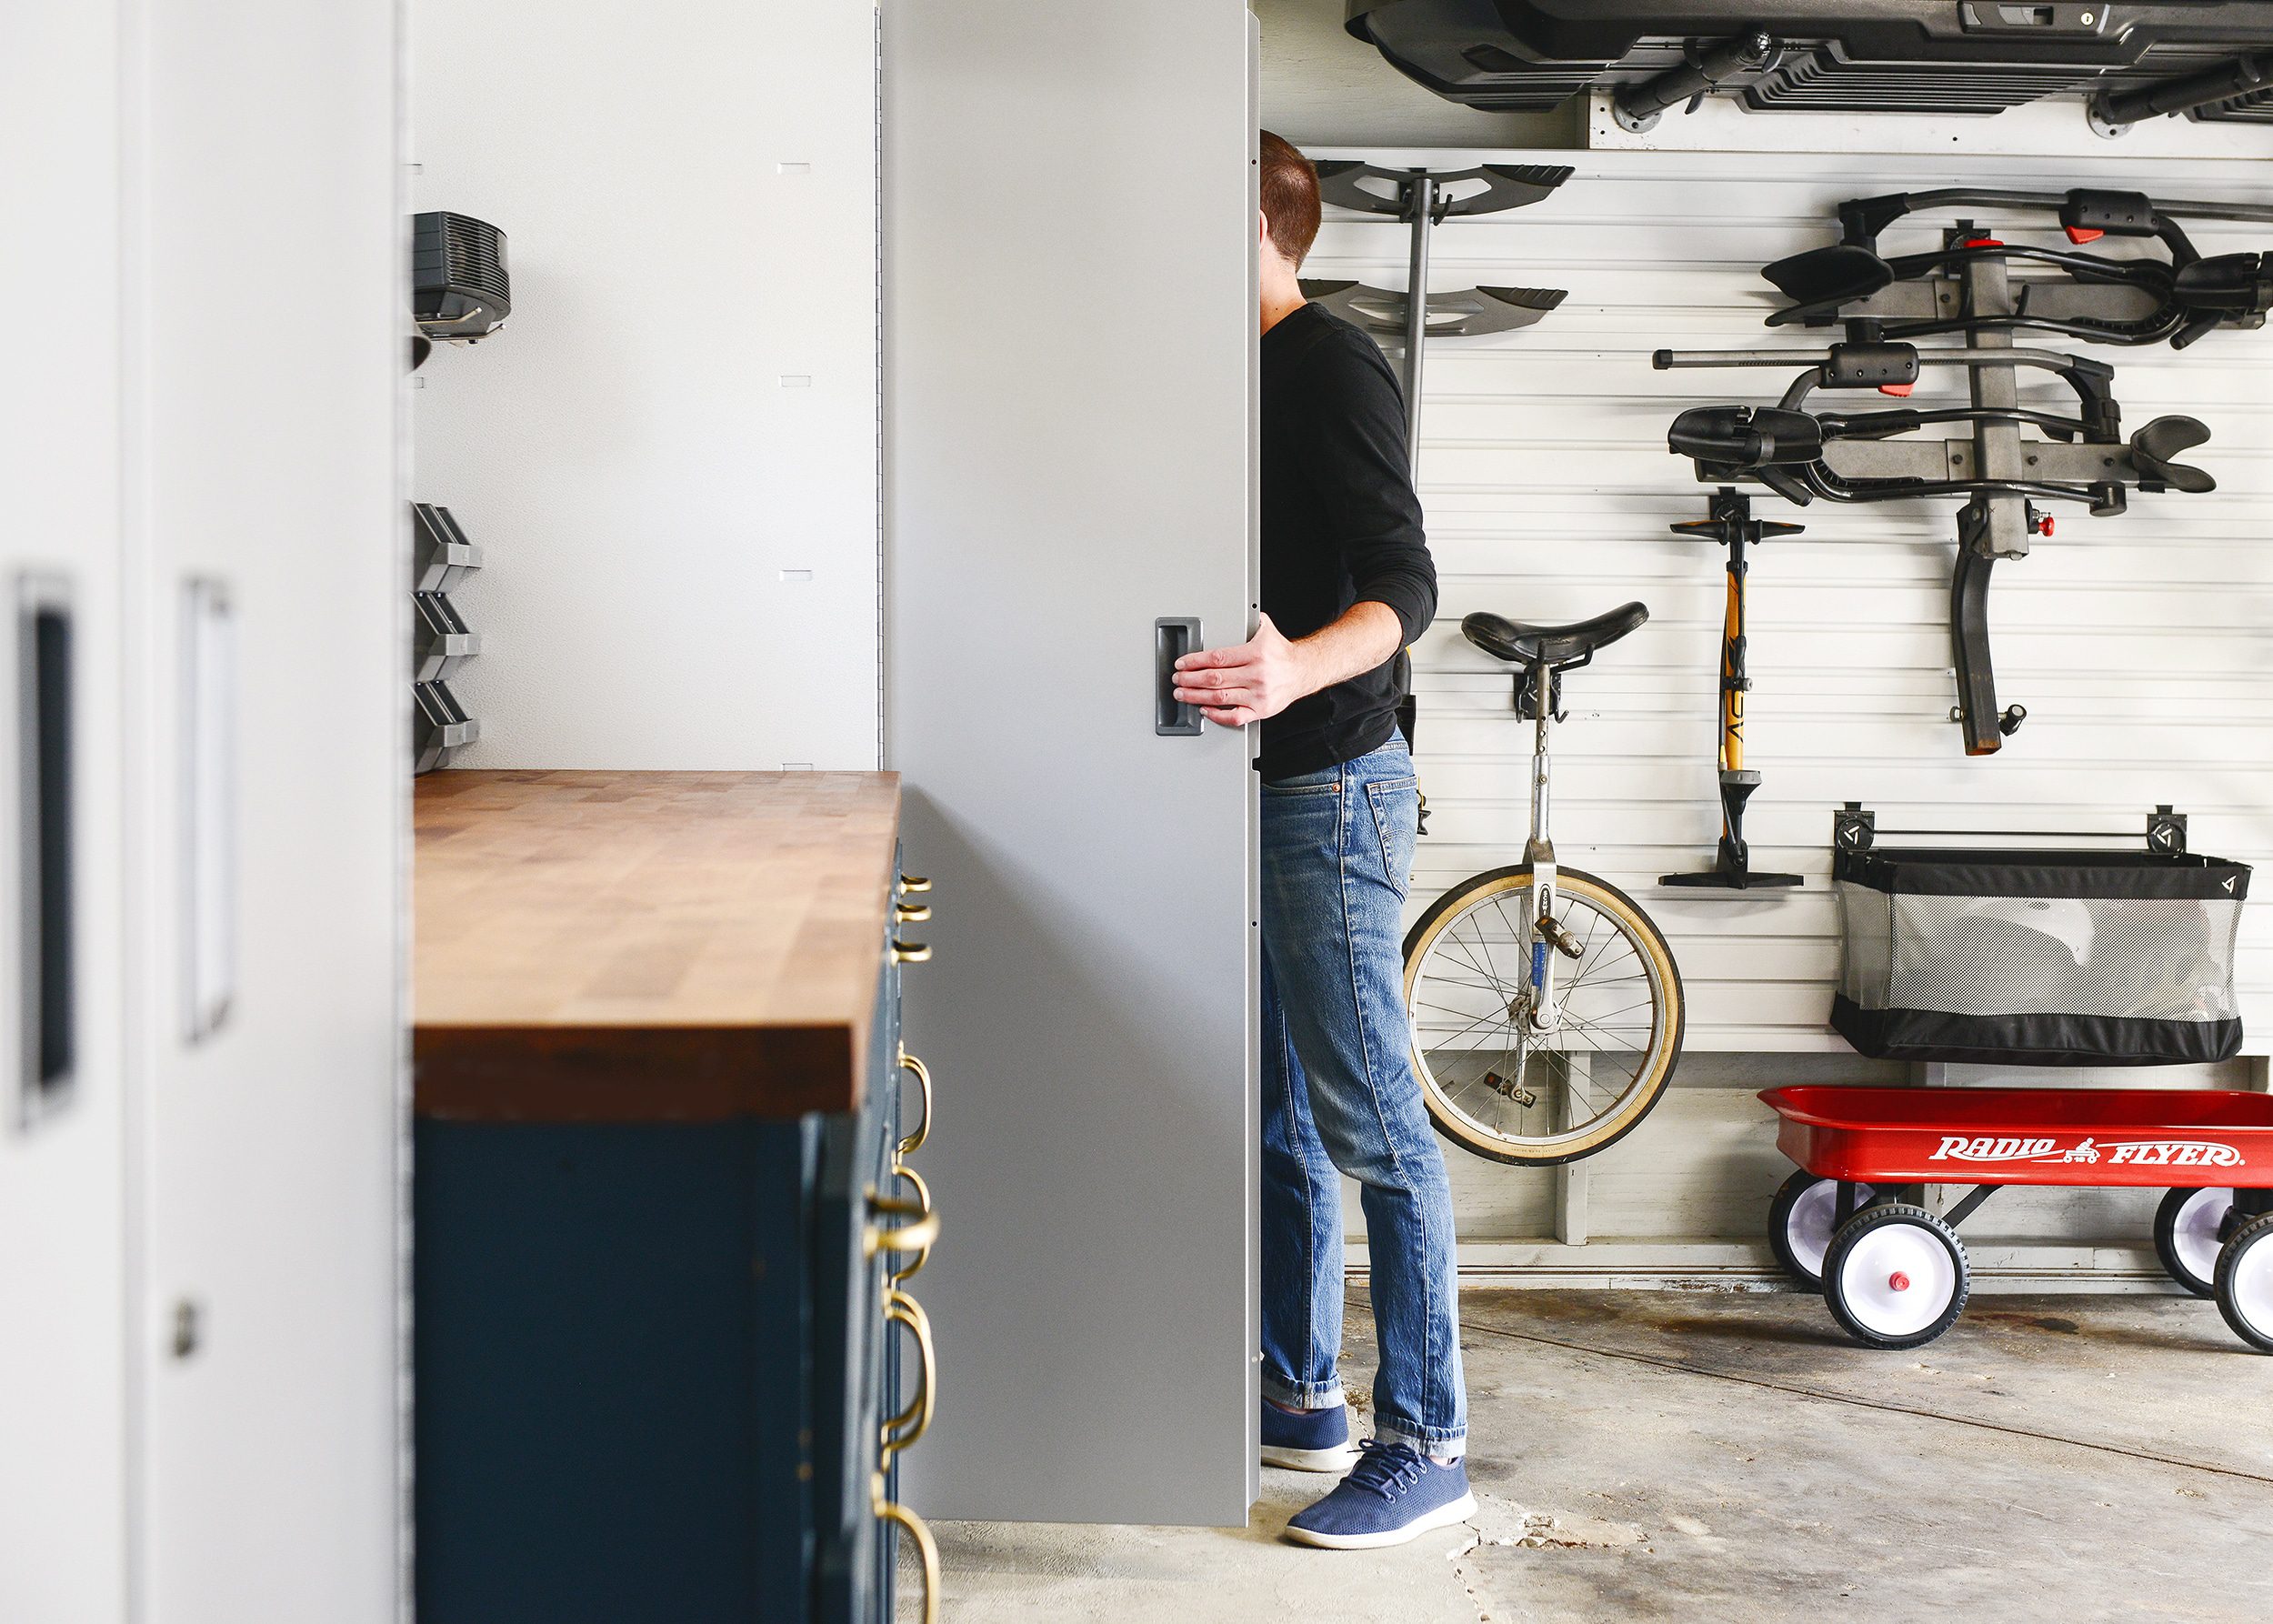 Gladiator cabinets for the garage // 7 Garage Organization Tips Before Winter Hits! via Yellow Brick Home with Lowe's Home Improvement #lowespartner